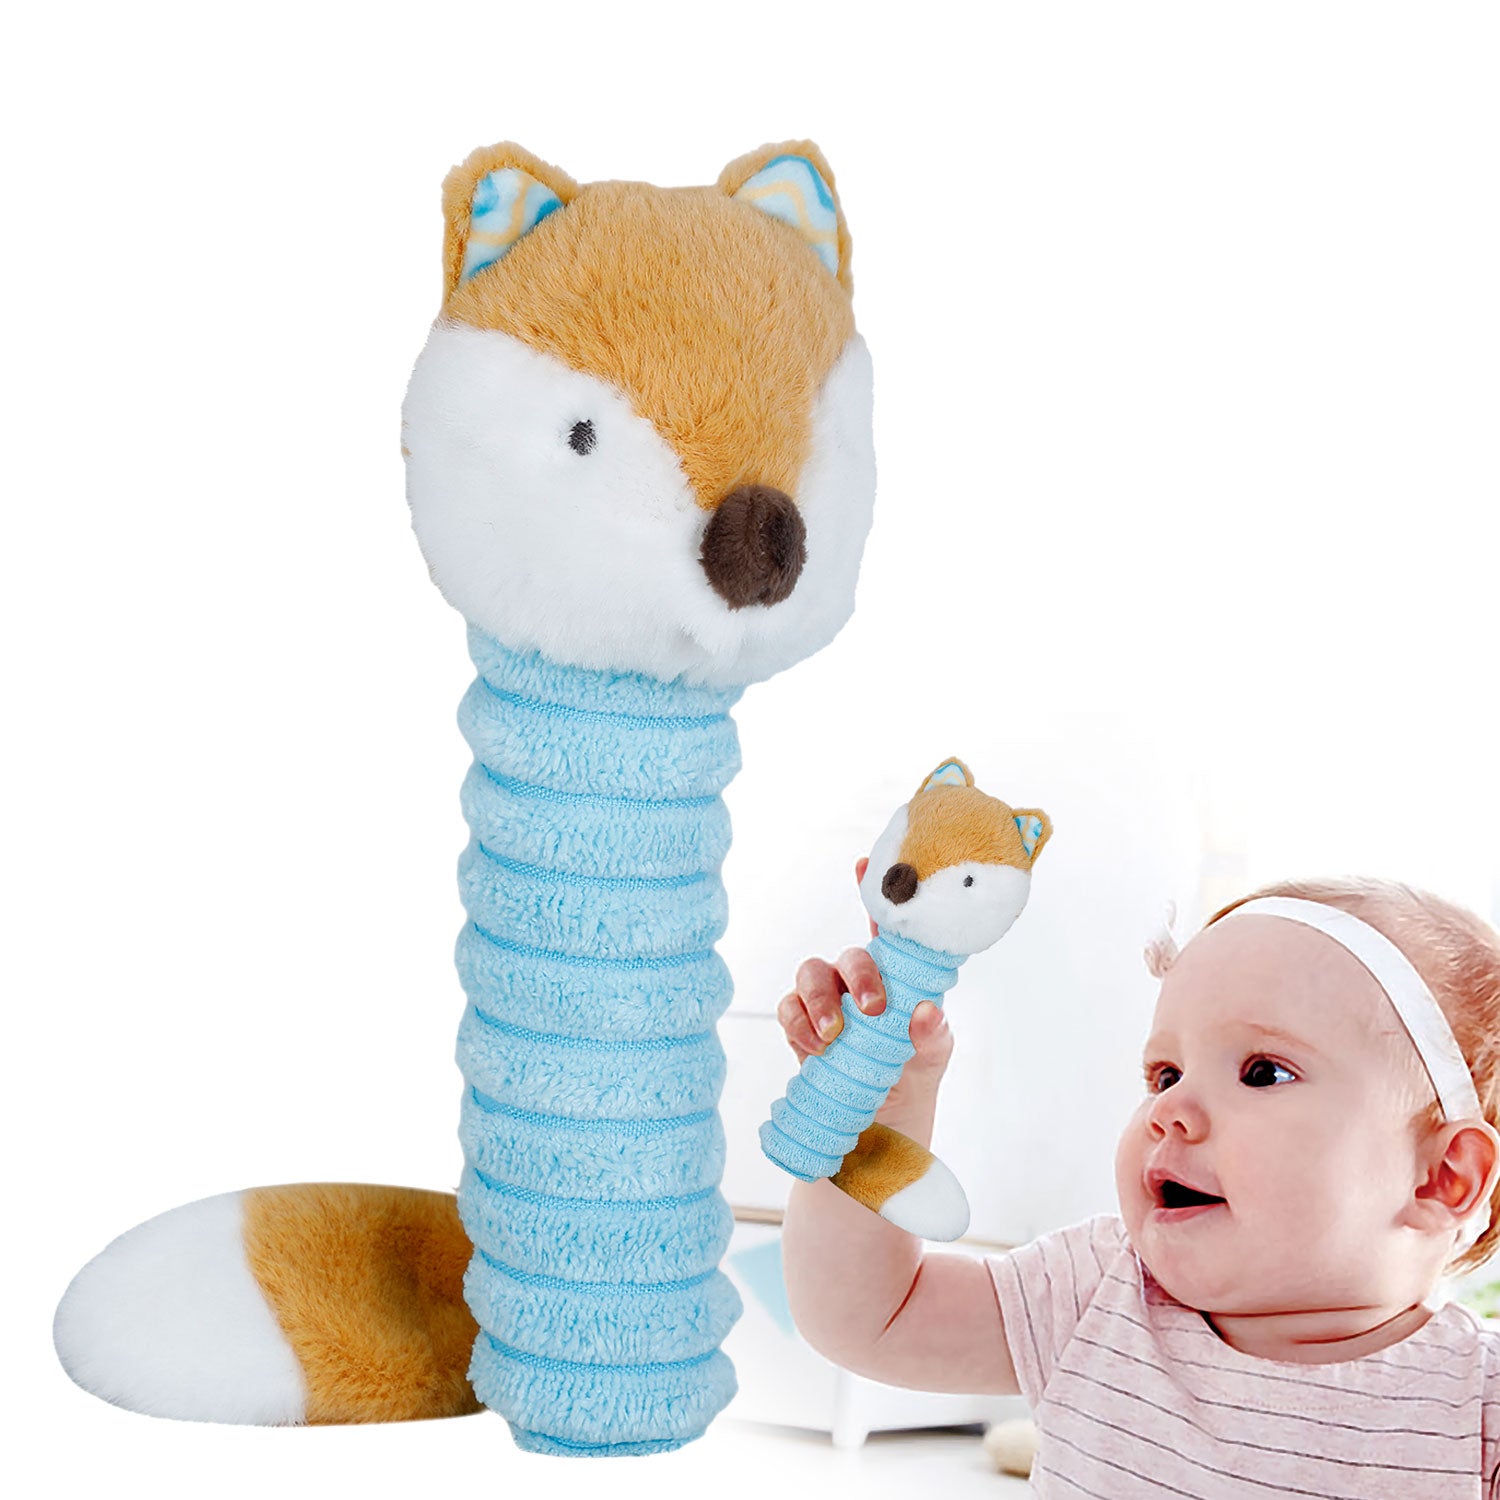 Baby Moo Clever Fox Squeaker And Rustle Paper Handheld Rattle Toy - Blue